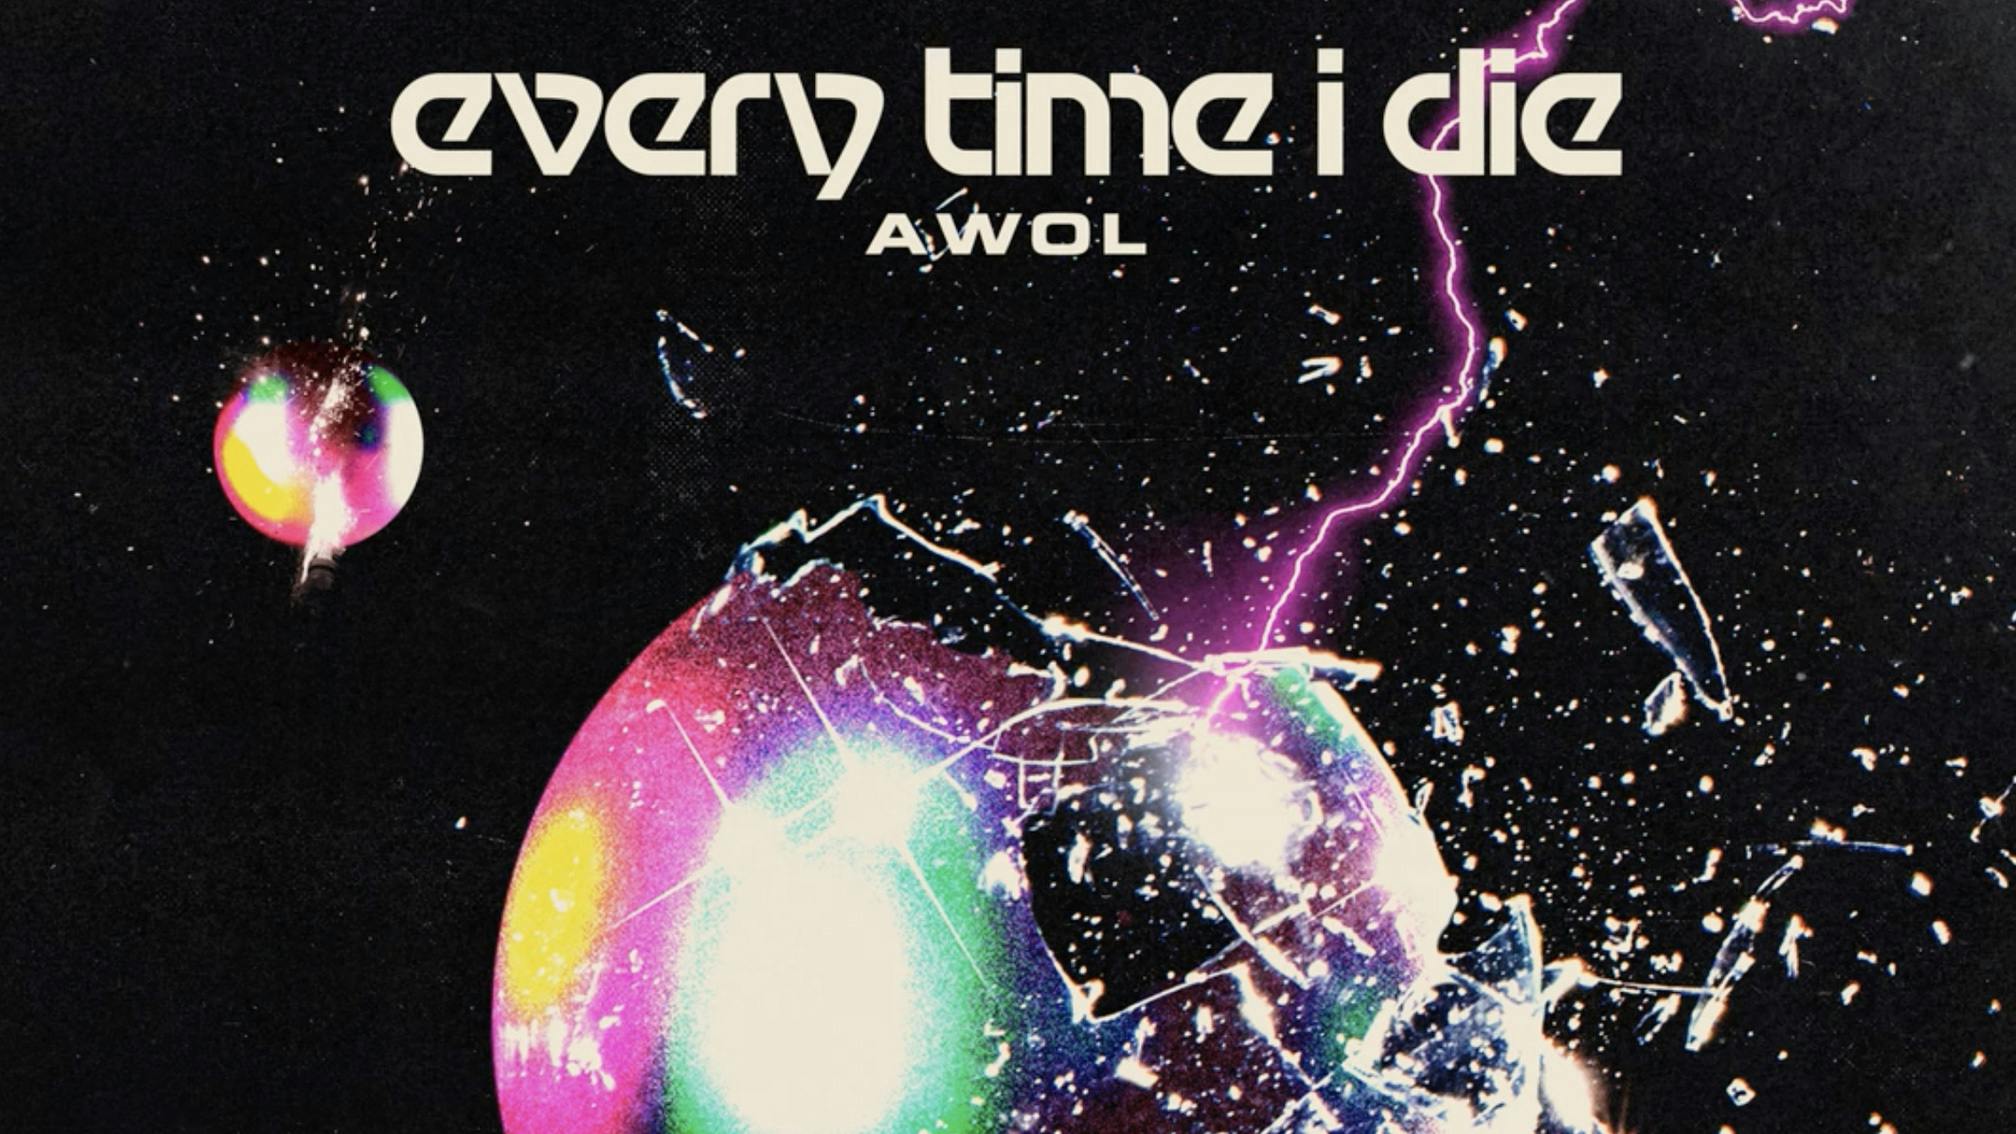 Every Time I Die have released another awesome new song, AWOL